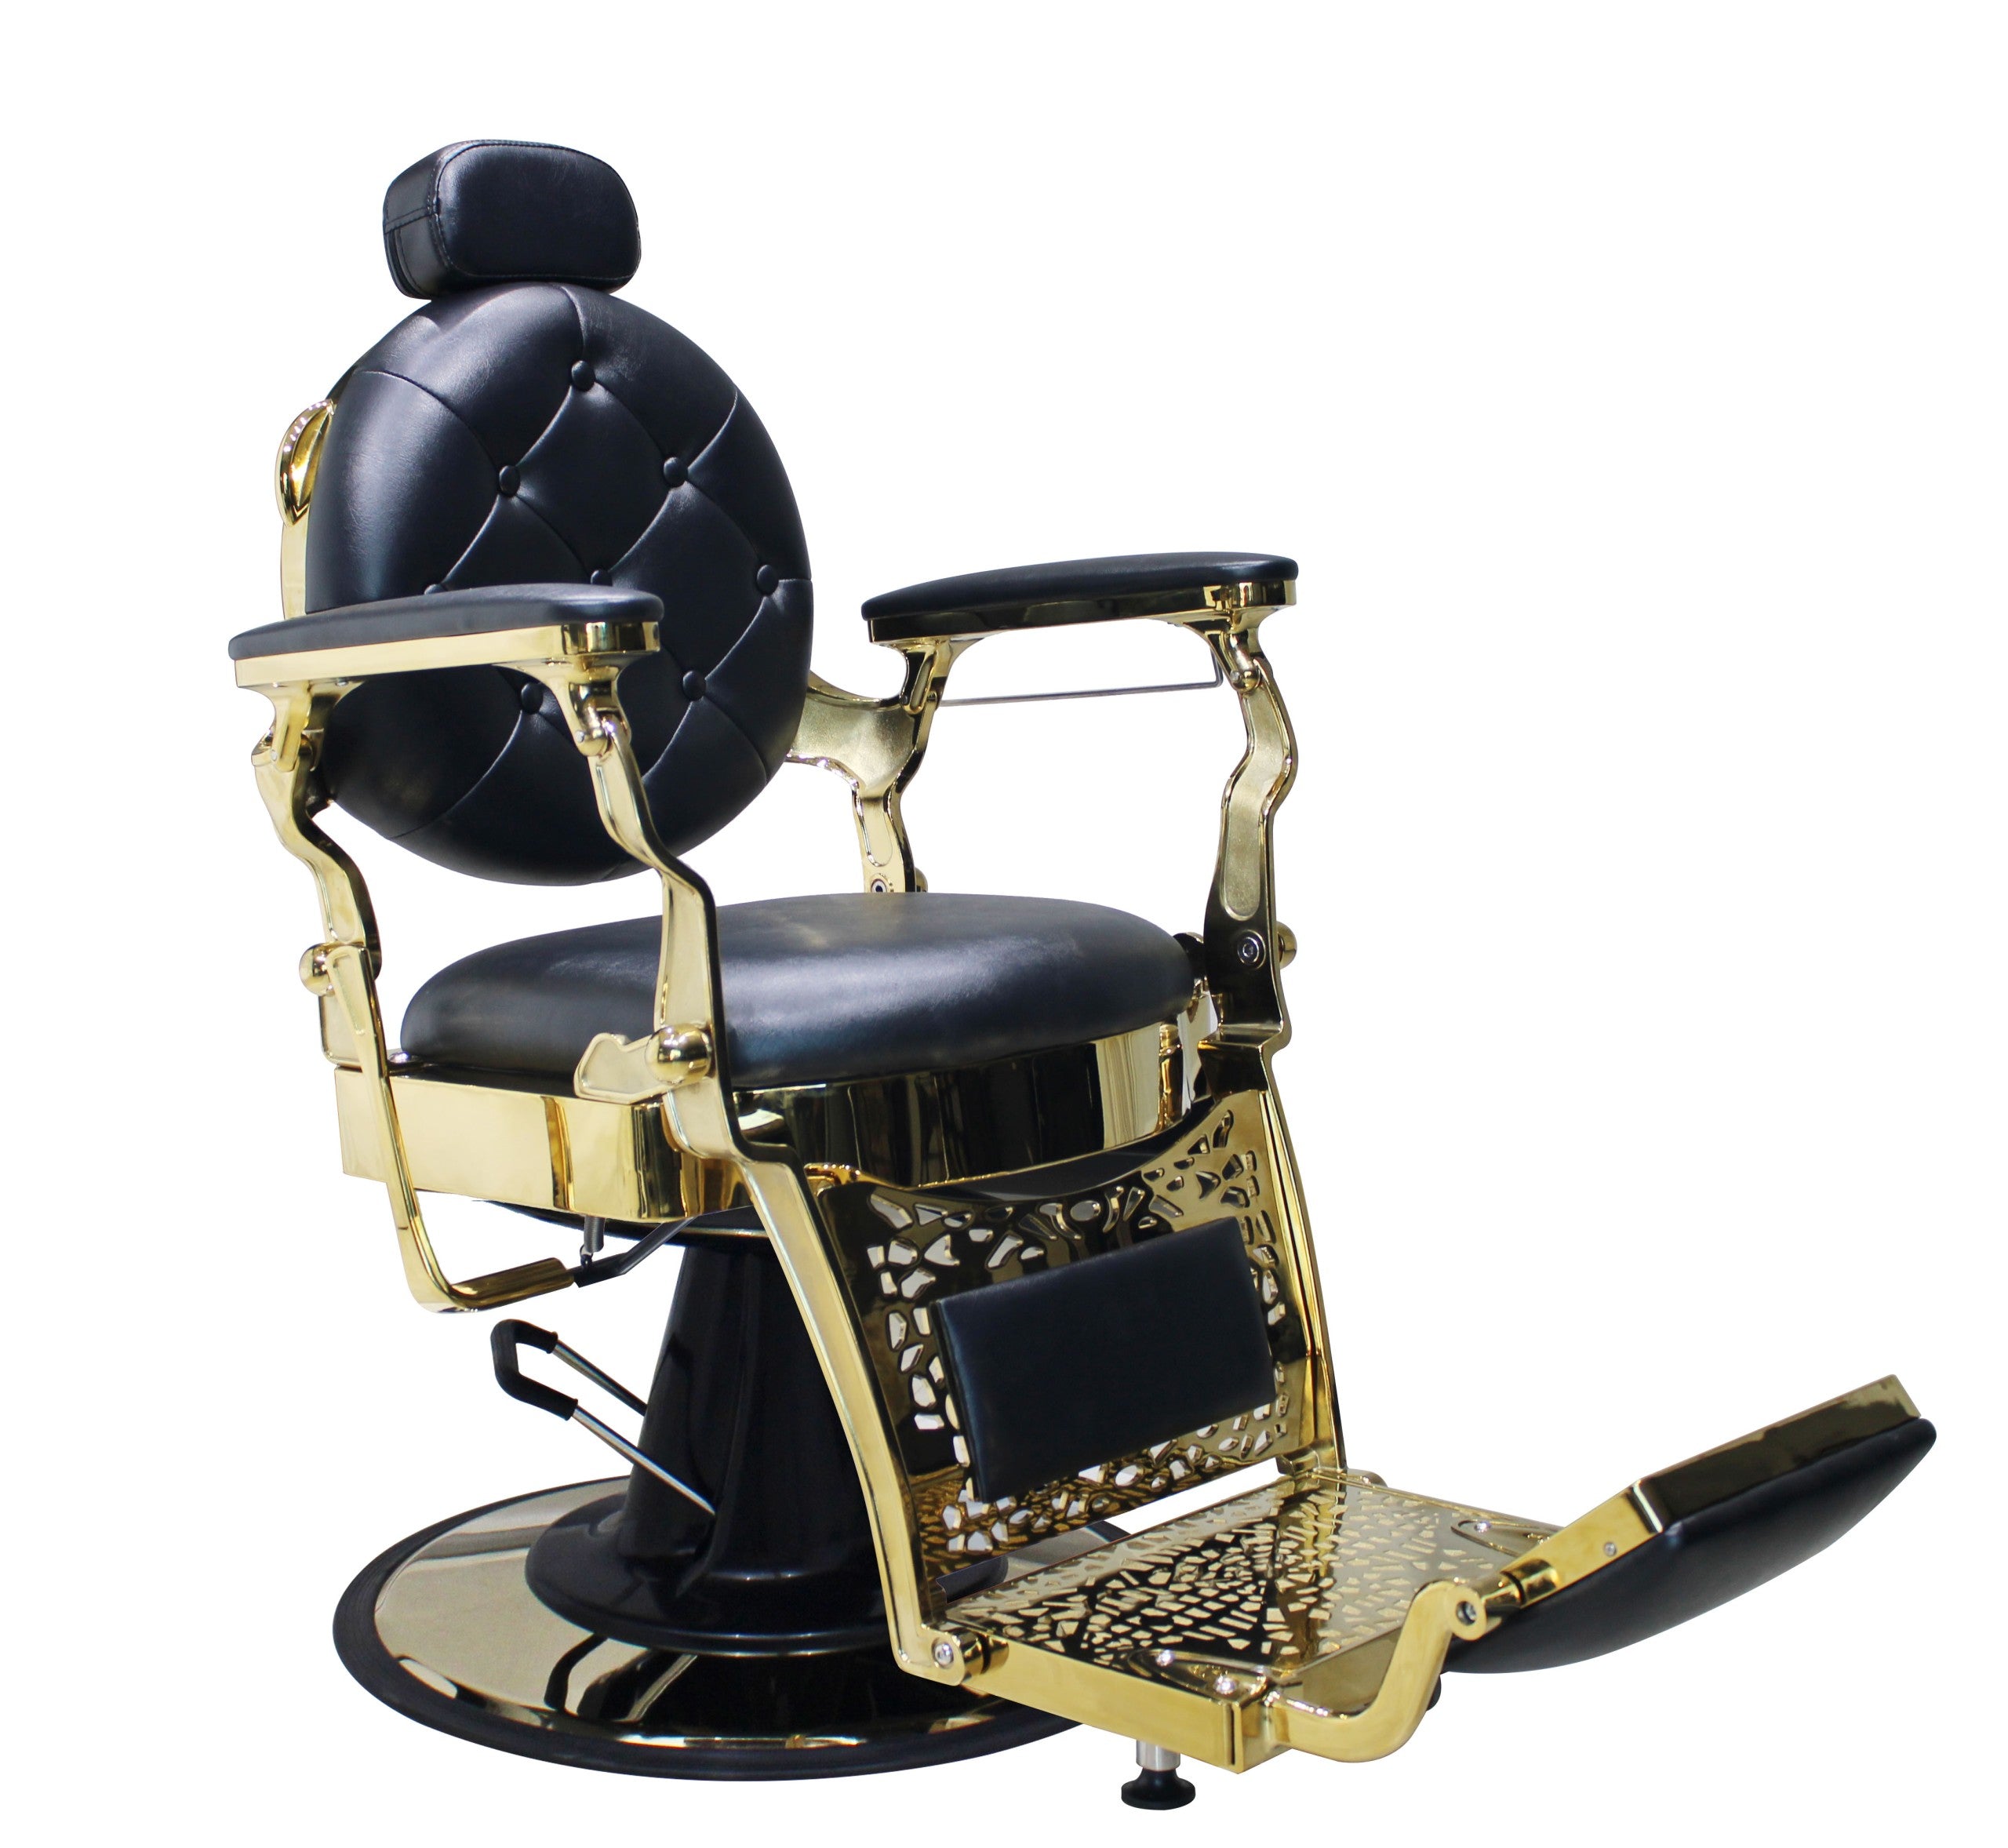 London Crew Barber Chair - Gold